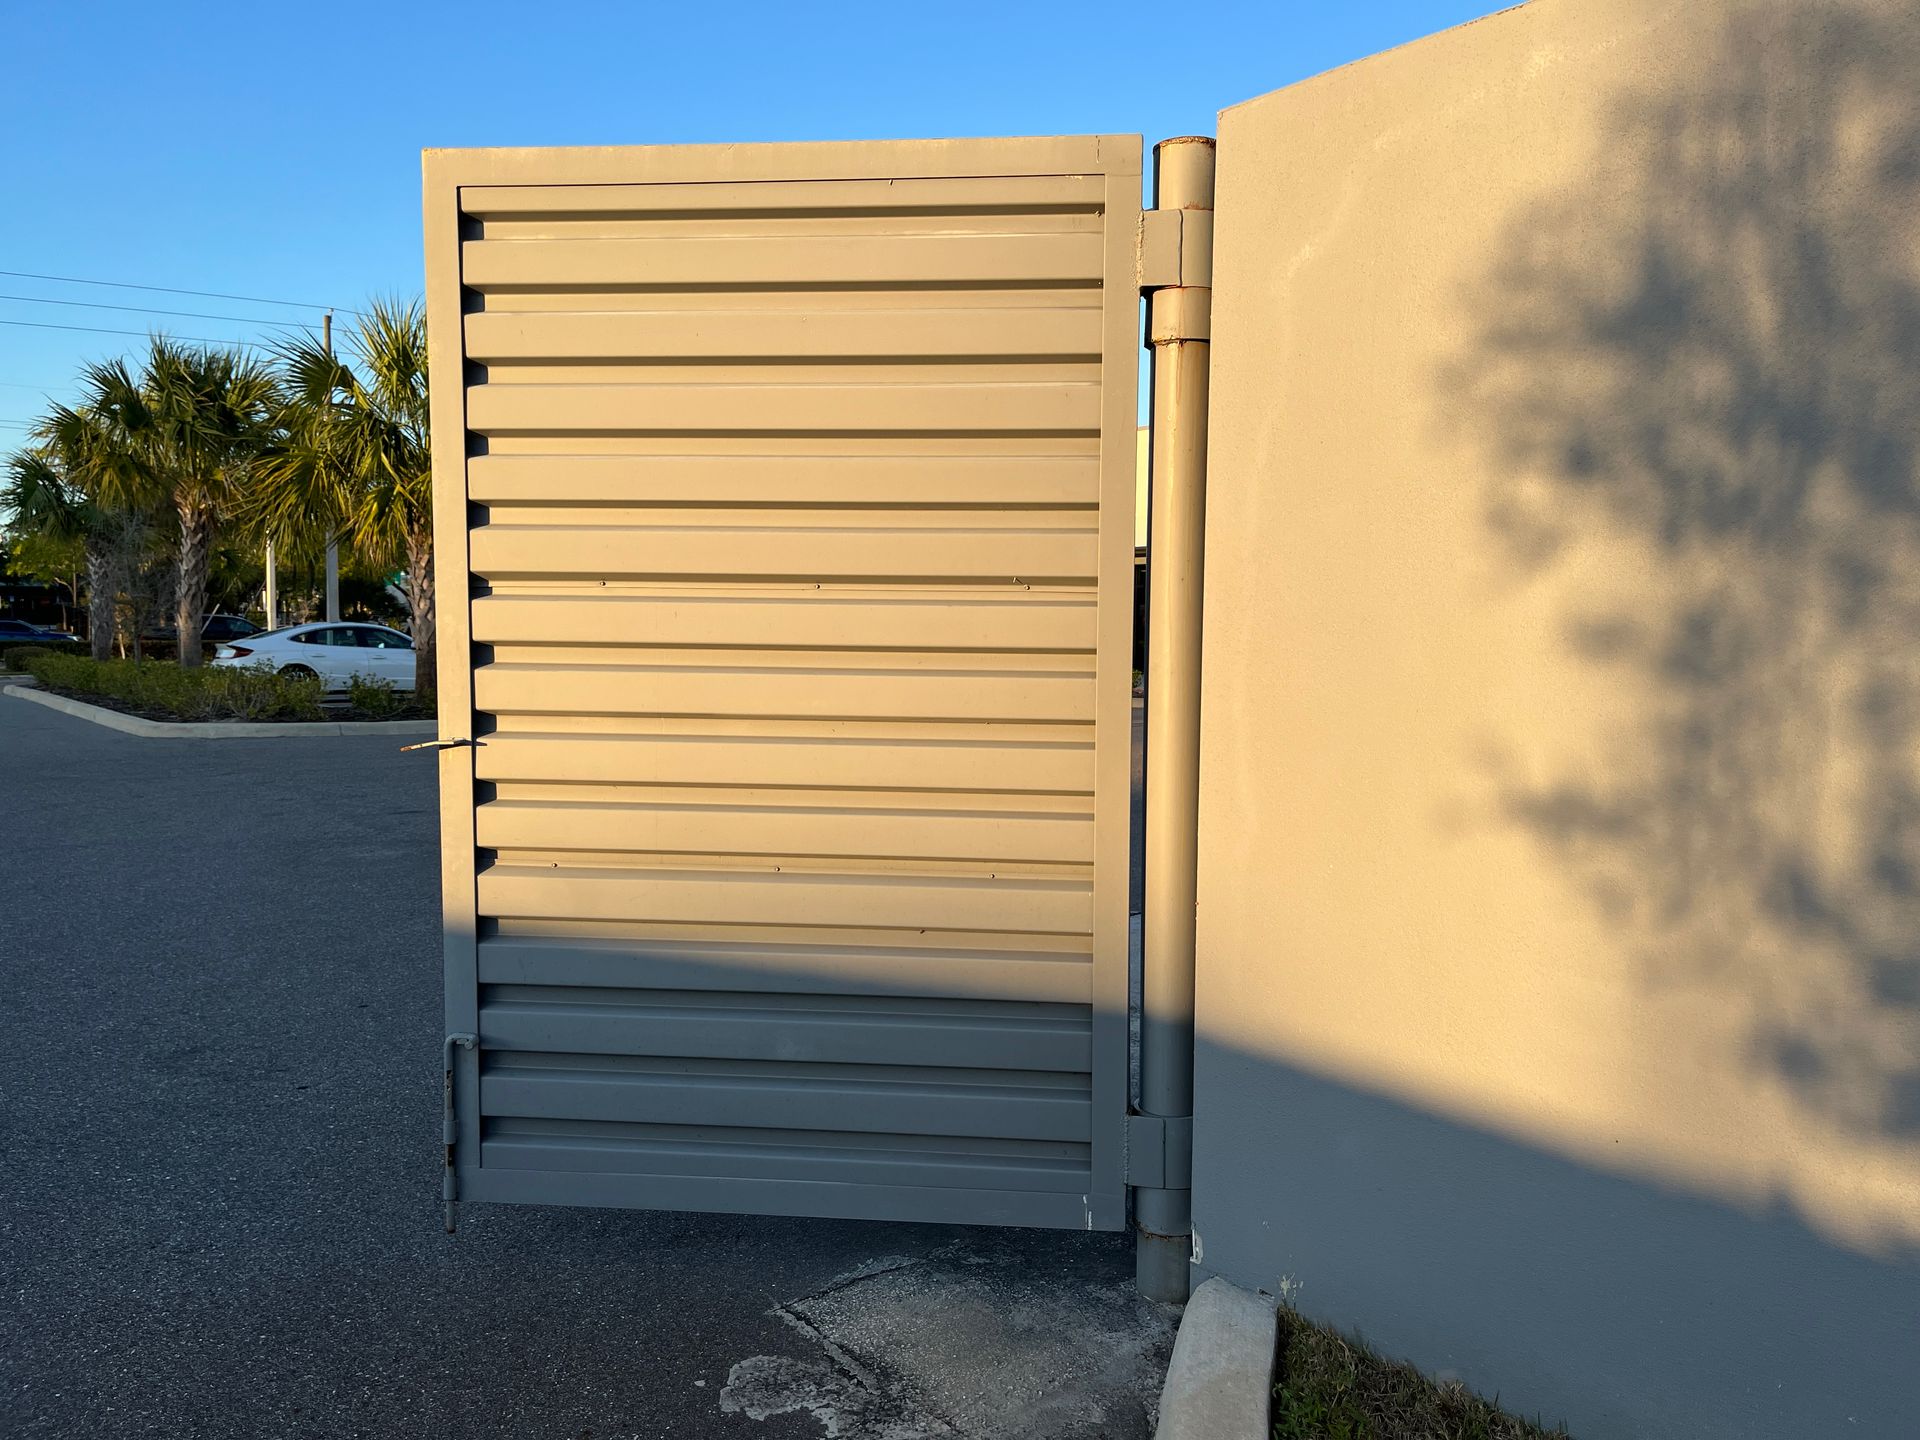 trash door mounted on pole installed in concrete